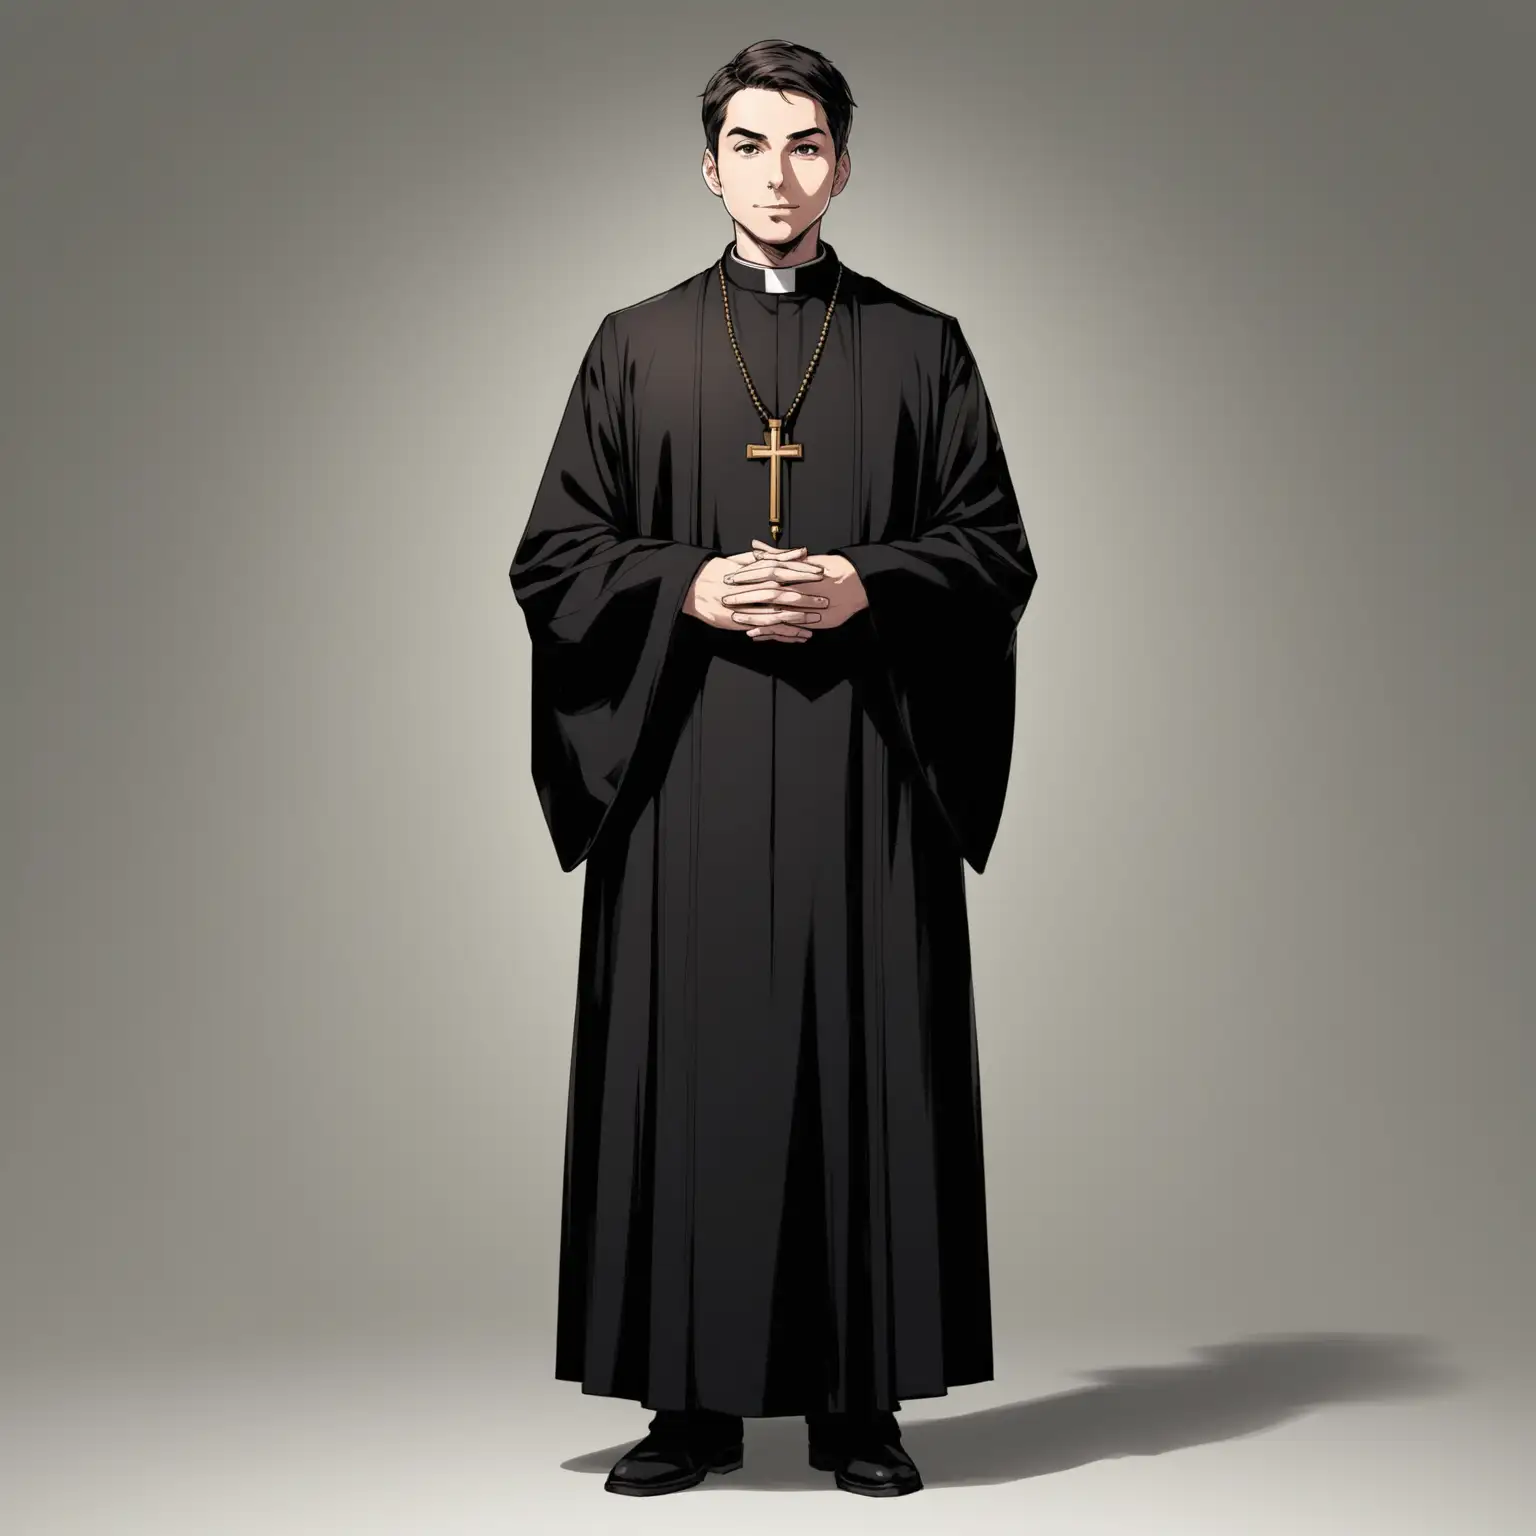 Full body front view, plain background, Male Priest wearing black 